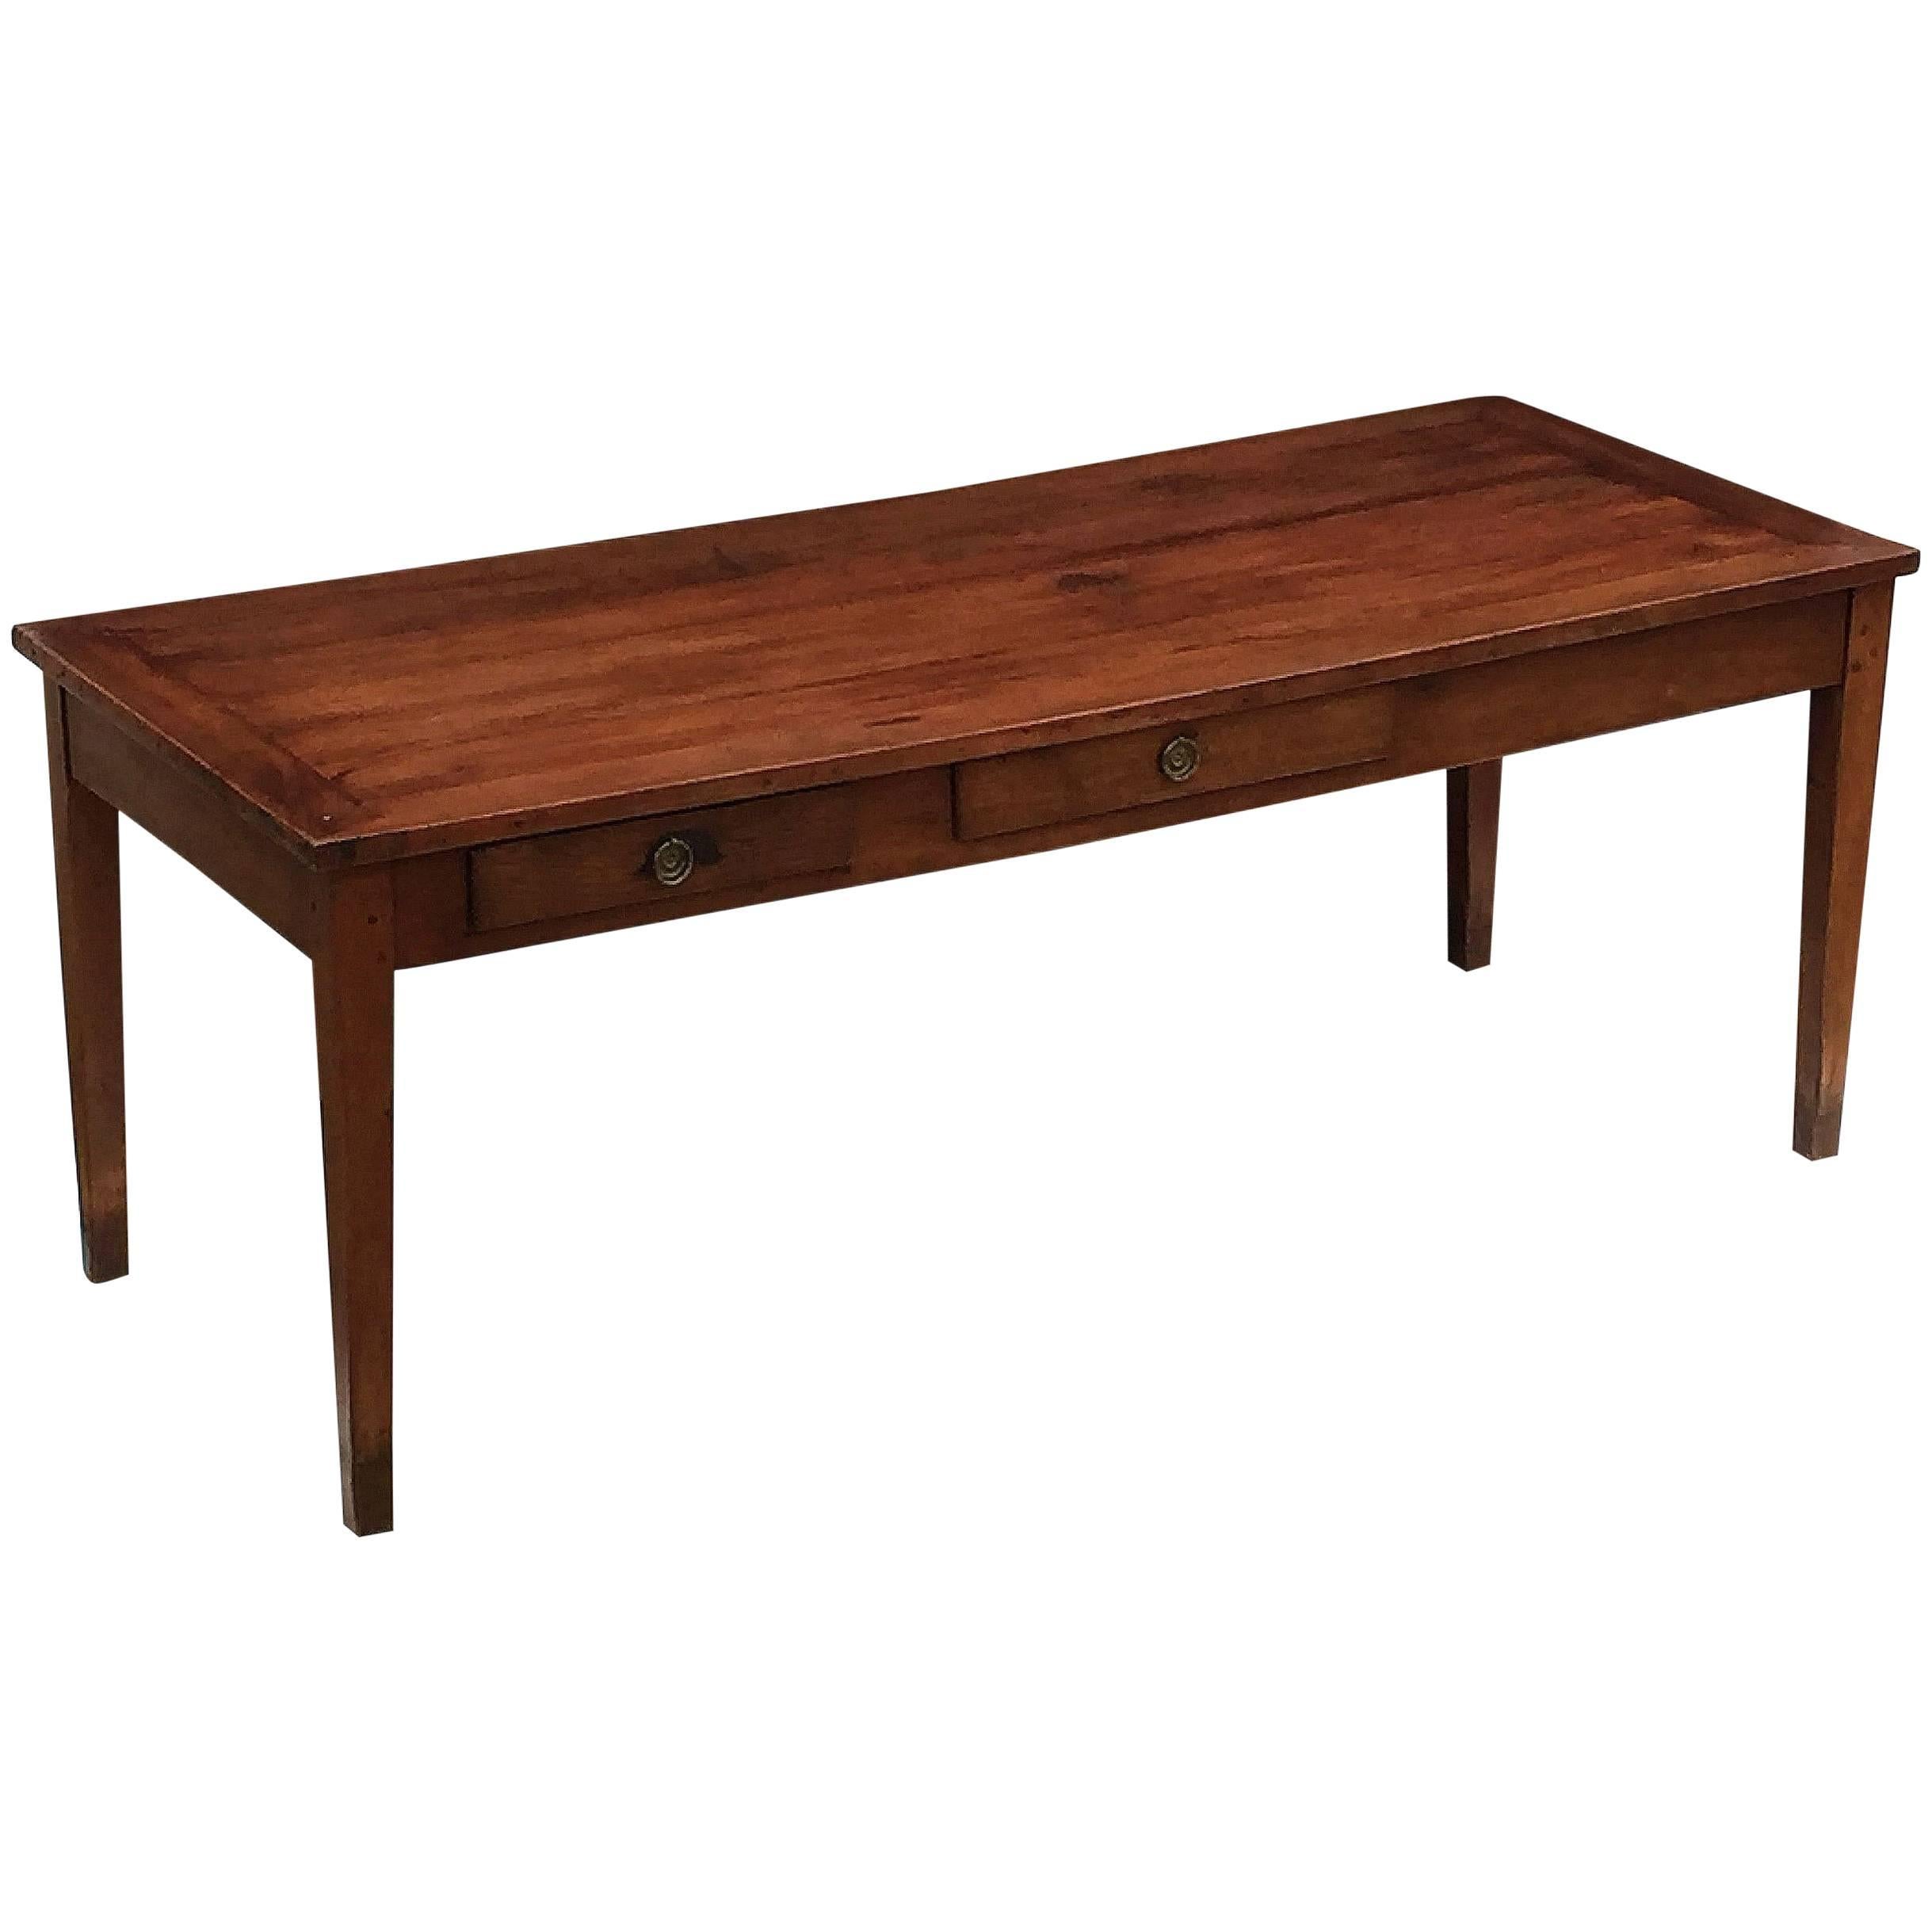 French Farm Table of Cherry with Three Drawers